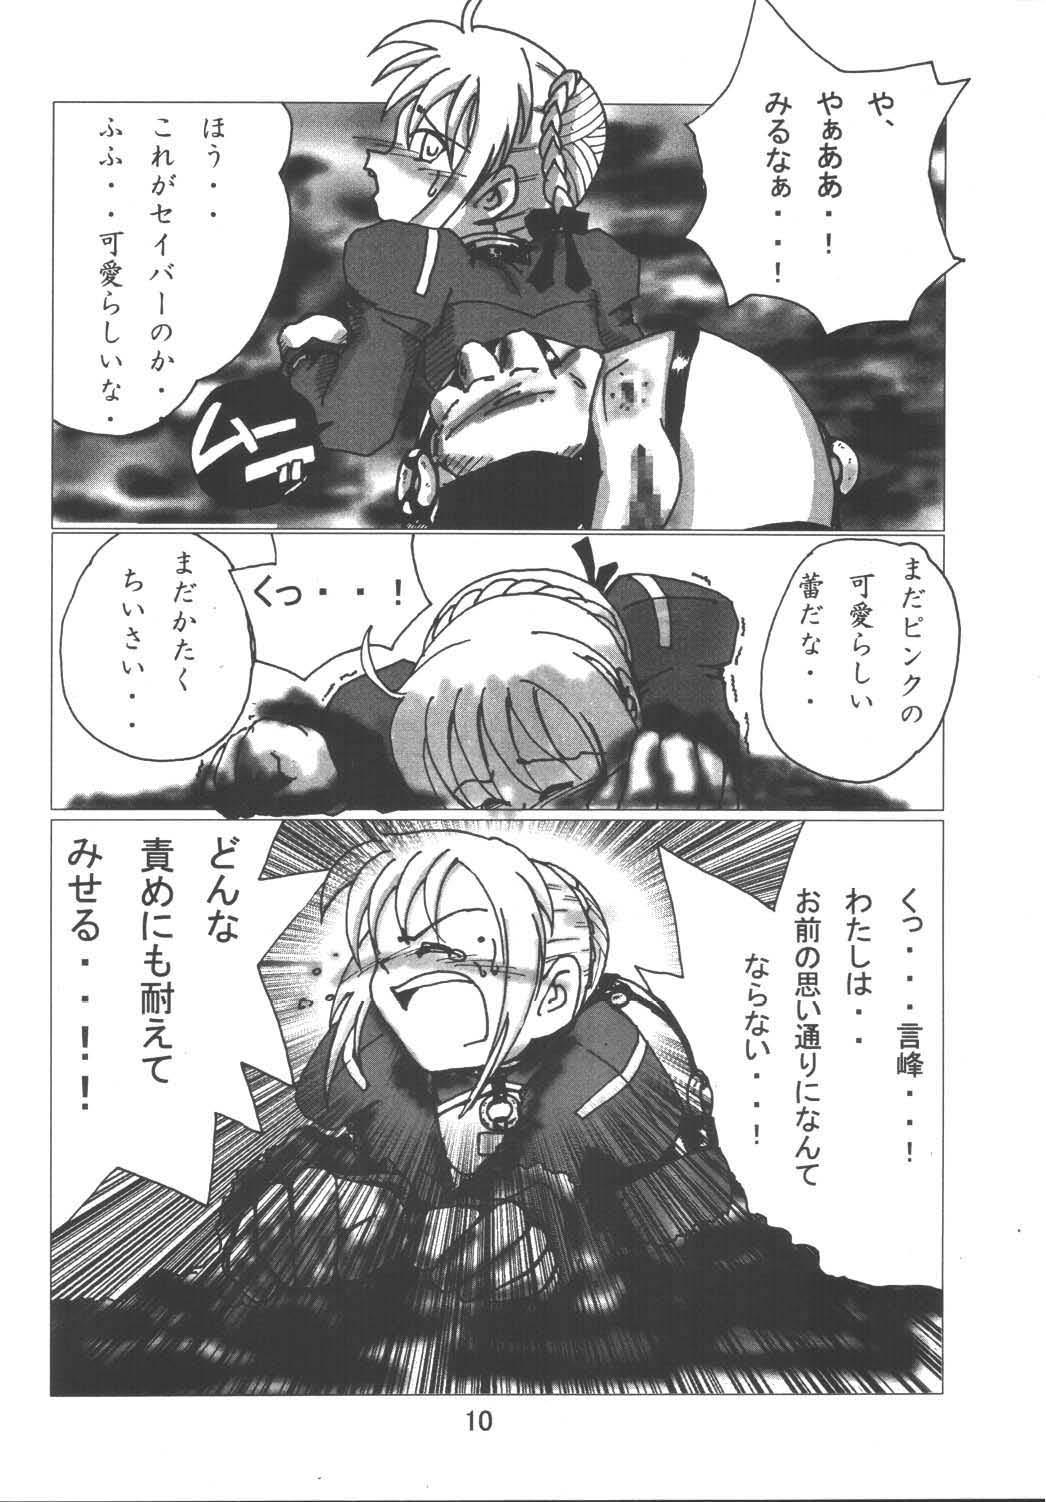 Amature Porn Fate Nightmare For Saber - Fate stay night Pareja - Page 10